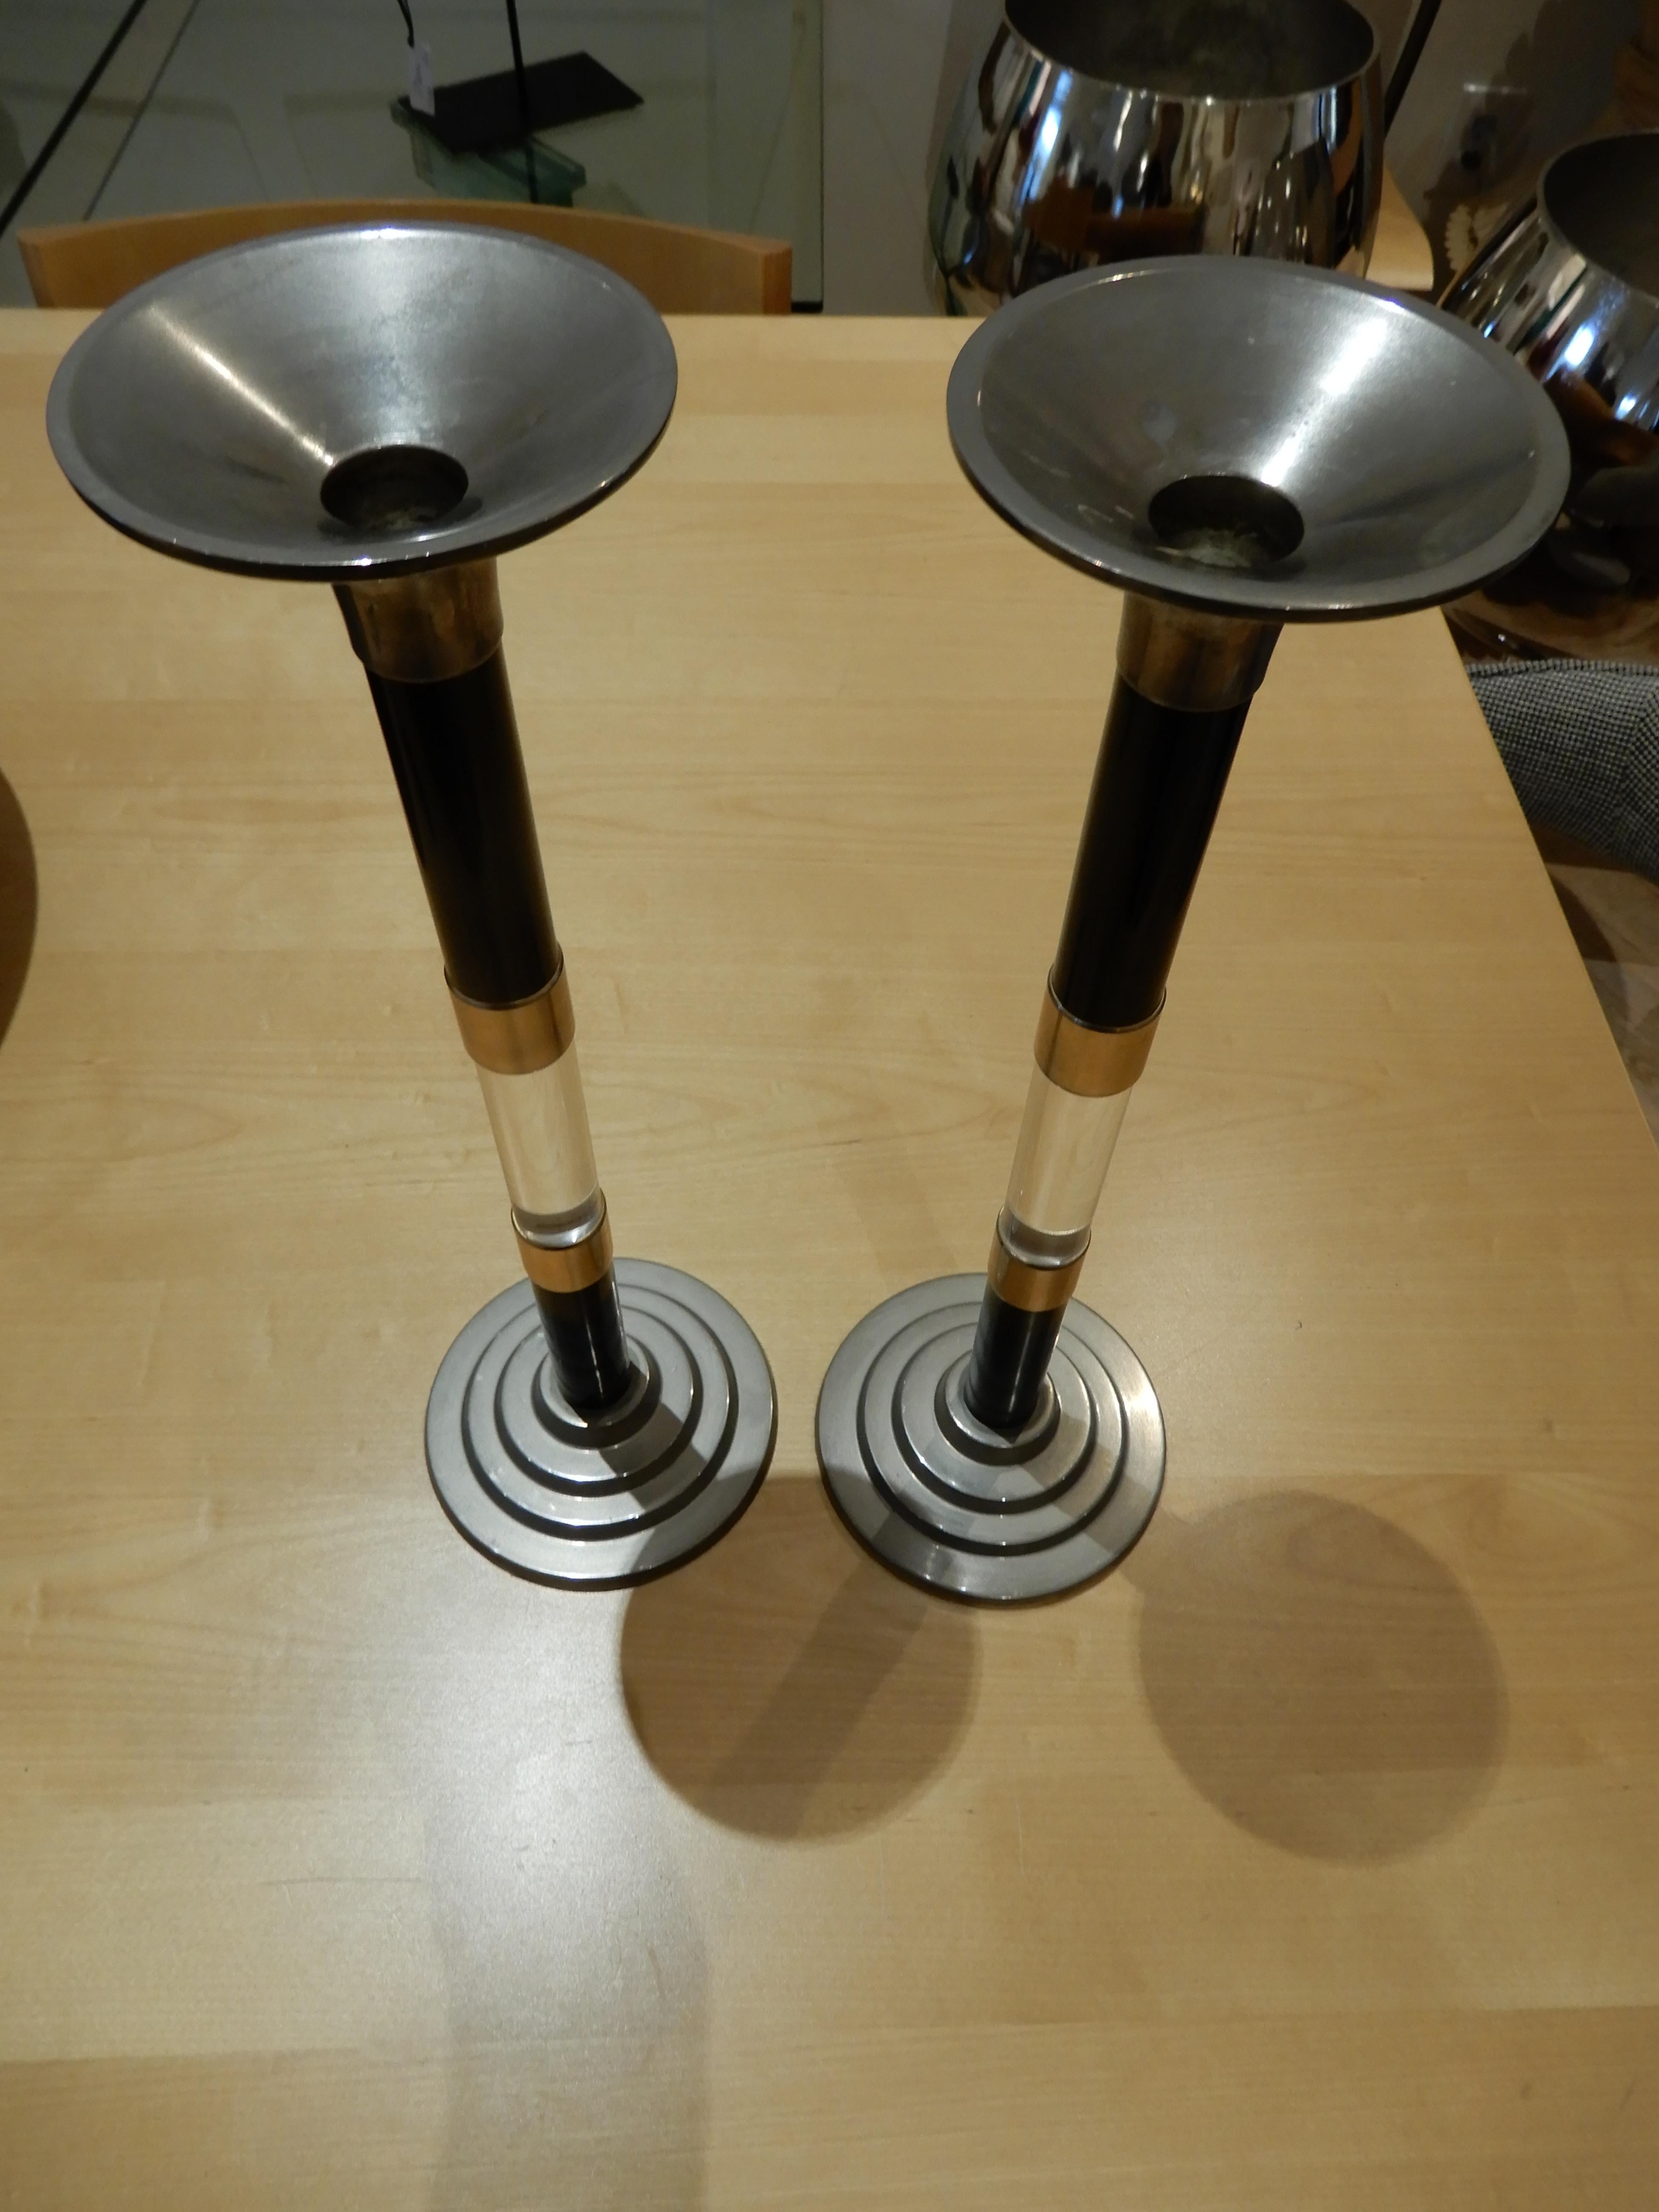 A rare find in these gunmetal, Lucite and brass candleholders, immaculate condition, not signed.